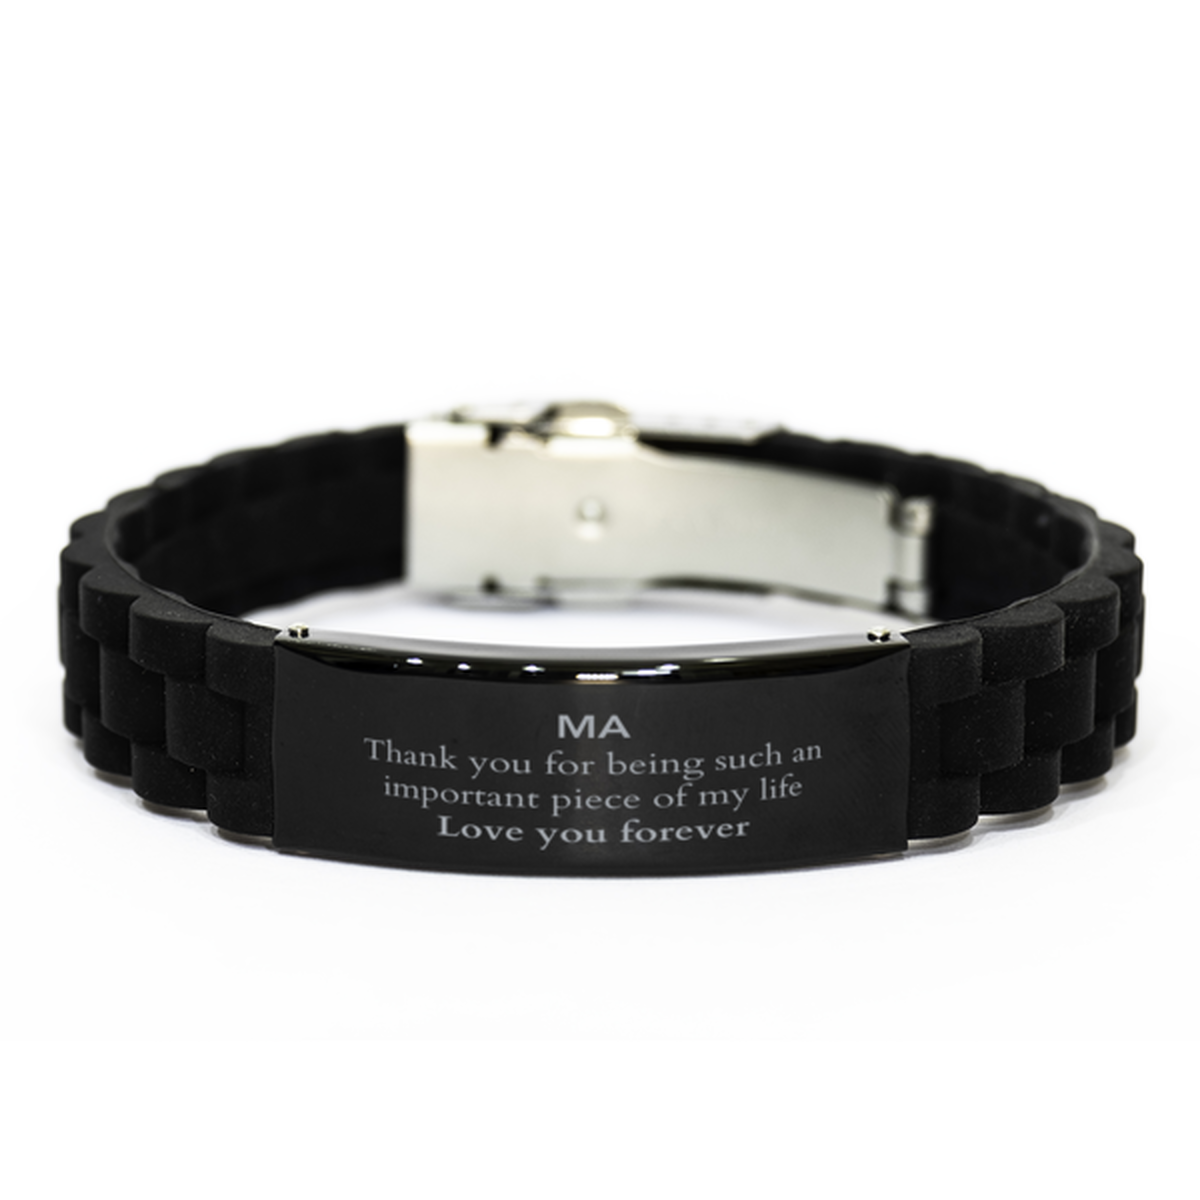 Appropriate Ma Black Glidelock Clasp Bracelet Epic Birthday Gifts for Ma Thank you for being such an important piece of my life Ma Christmas Mothers Fathers Day